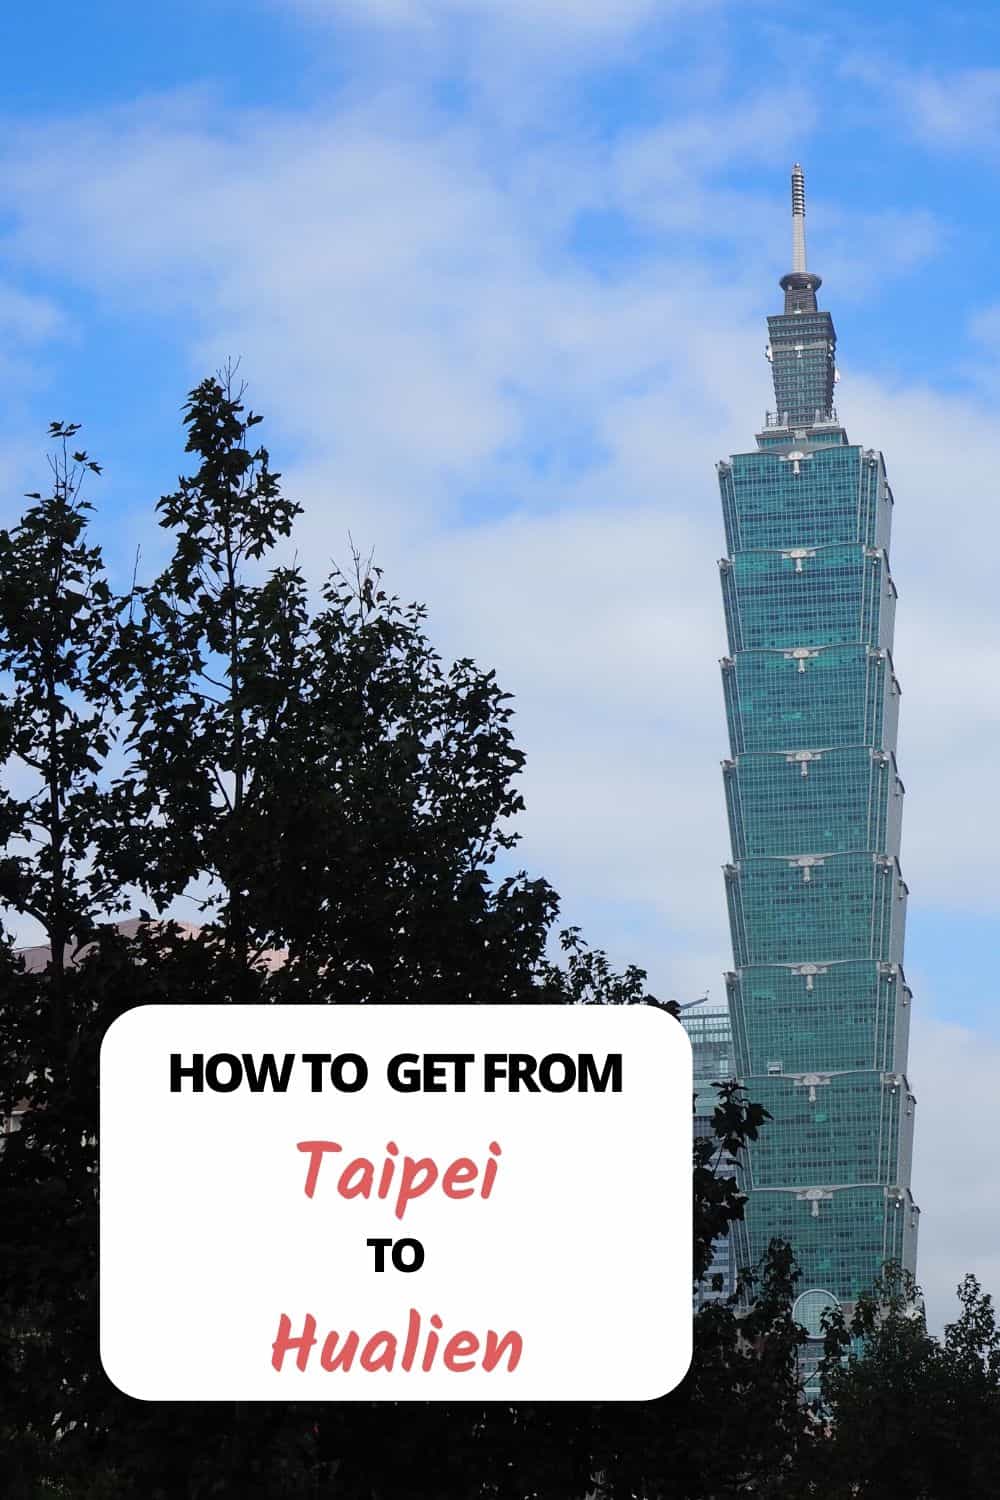 How to Get from Taipei to Hualien